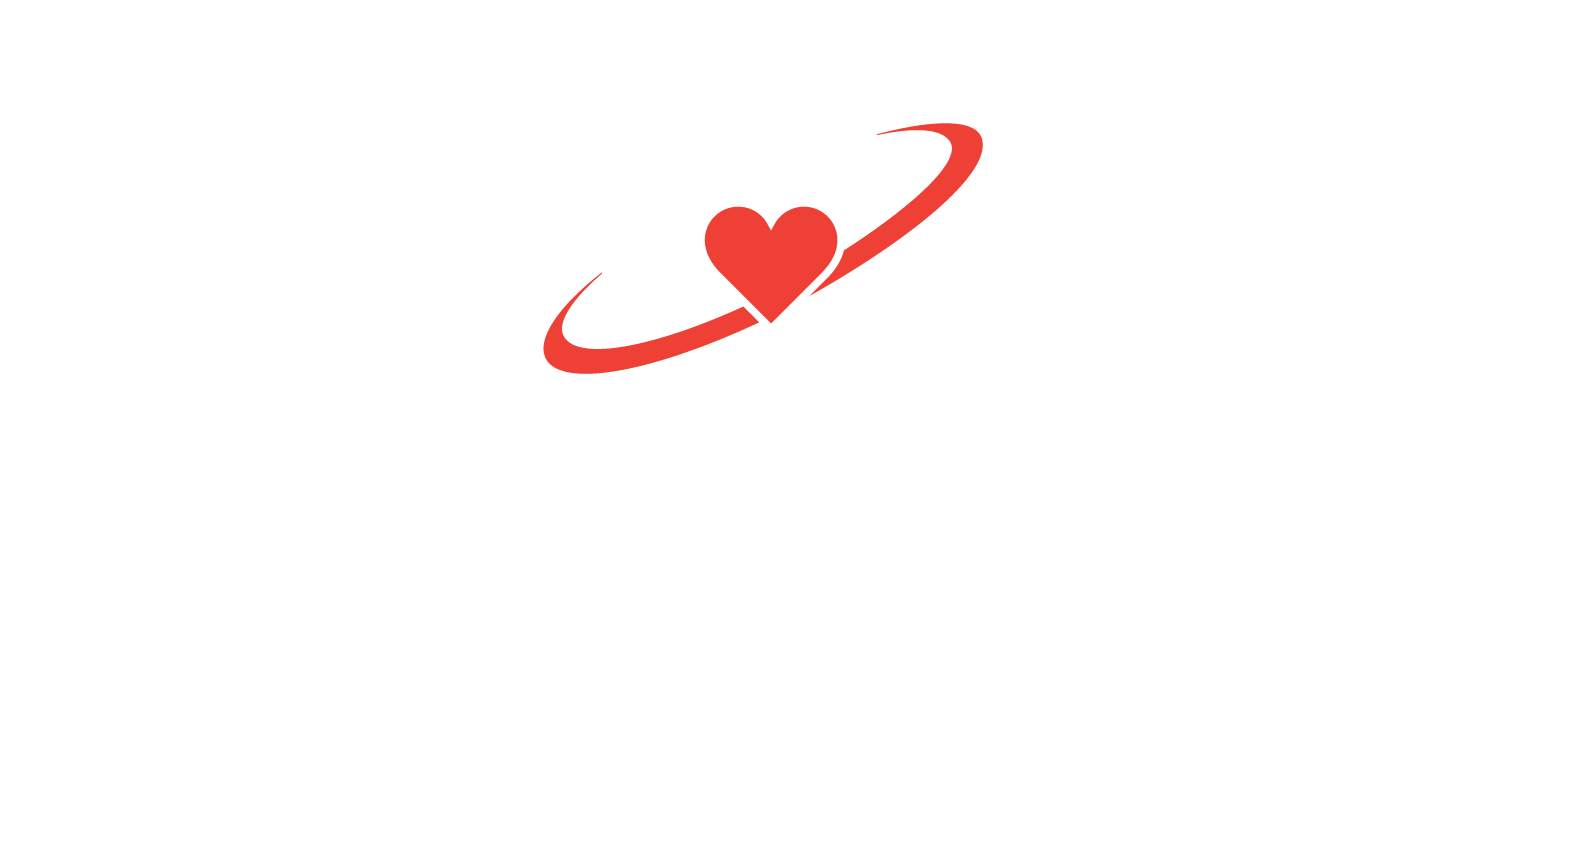 World Federation of Youth Clubs